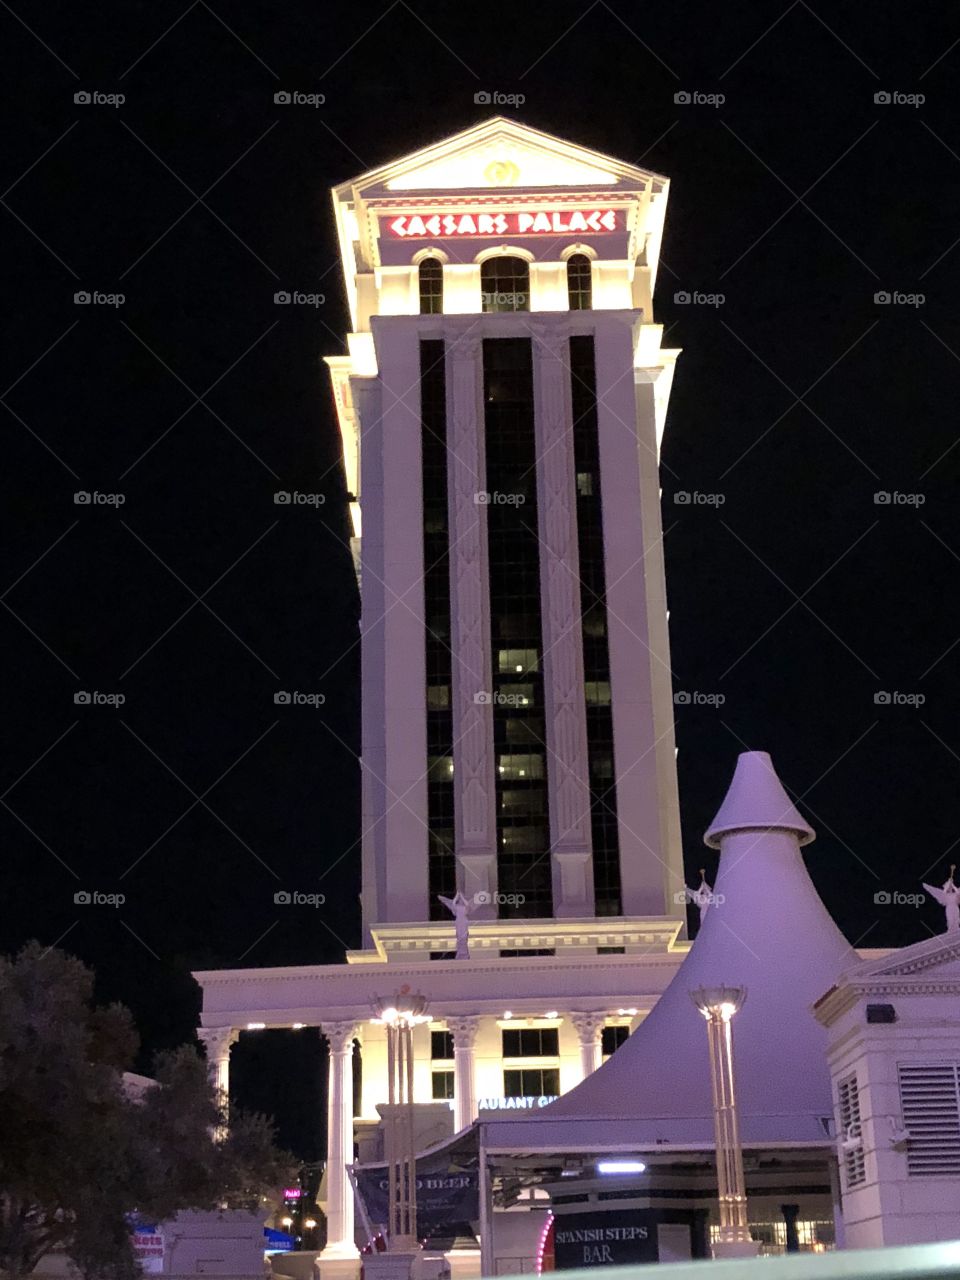 The Palace in Las Vegas